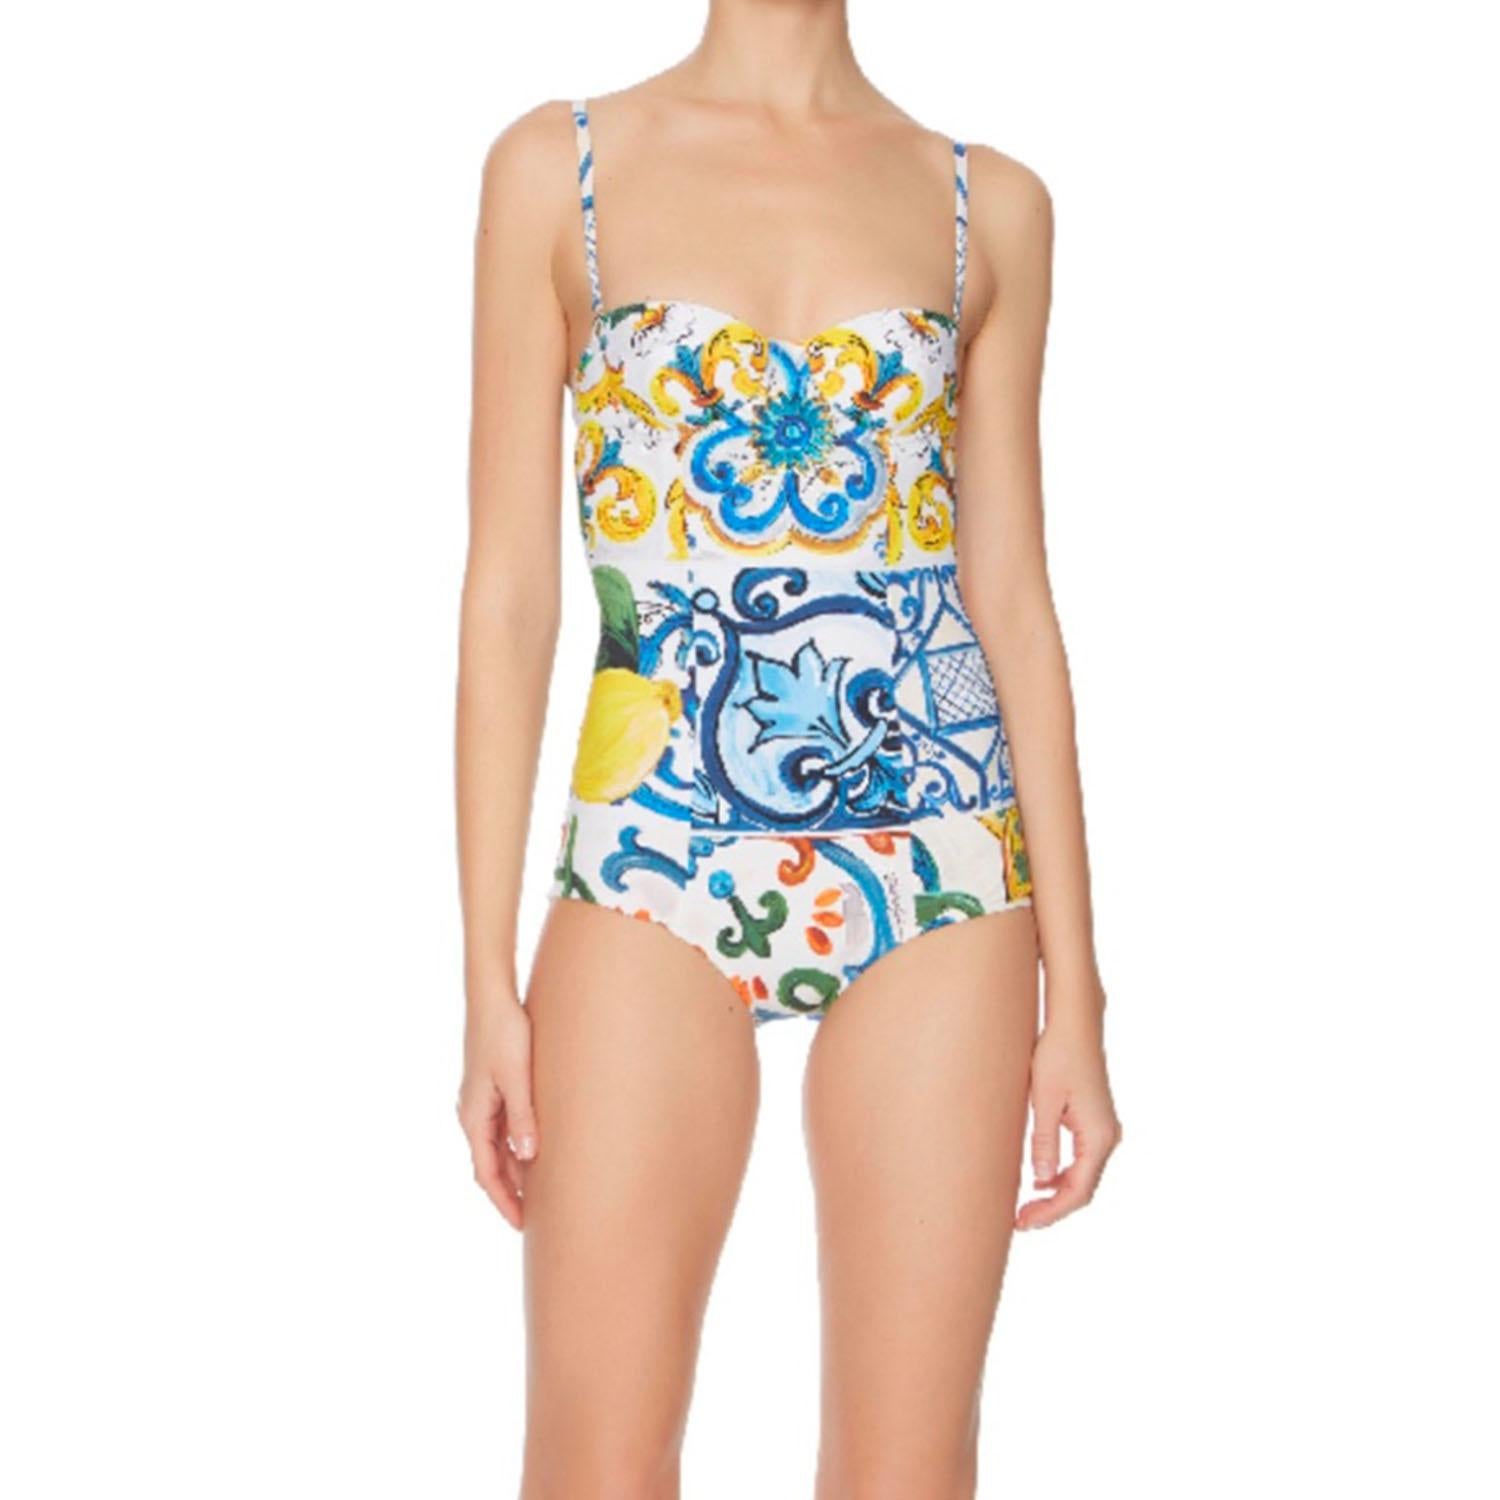 Dolce & Gabbana romantic full swimsuit with a built-in balcony bra made from precious fabric in the MAJOLICA print has an extraordinarily sensual look. Perfect for both the poolside and as a top for a cocktail party:
Underwired bra with padded